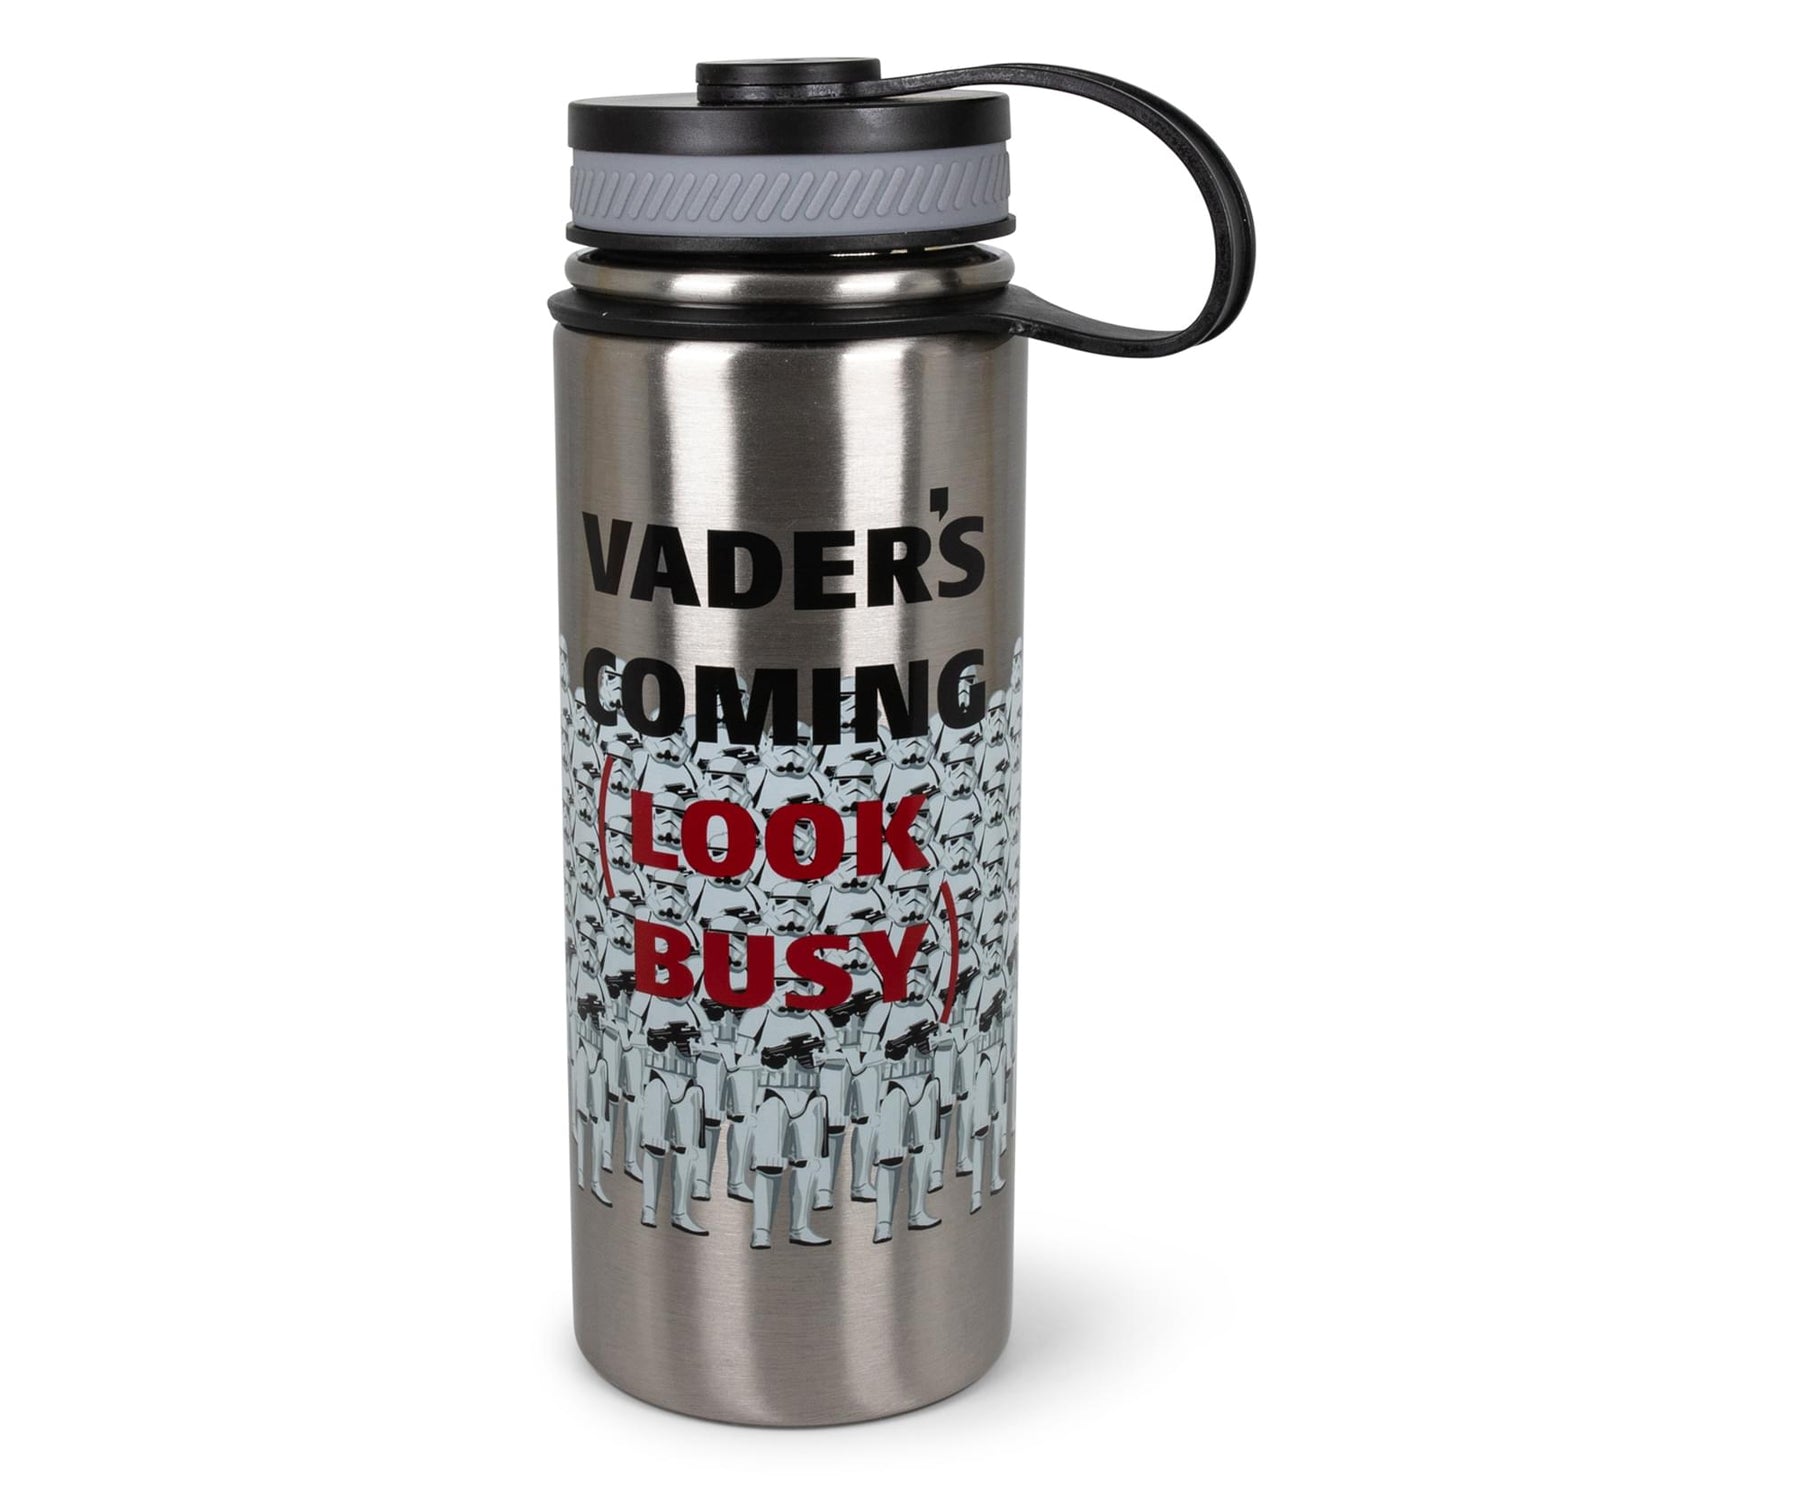 Star Wars Stormtroopers "Vader's Coming, Look Busy" Canteen Water Bottle | Holds 18 Ounces